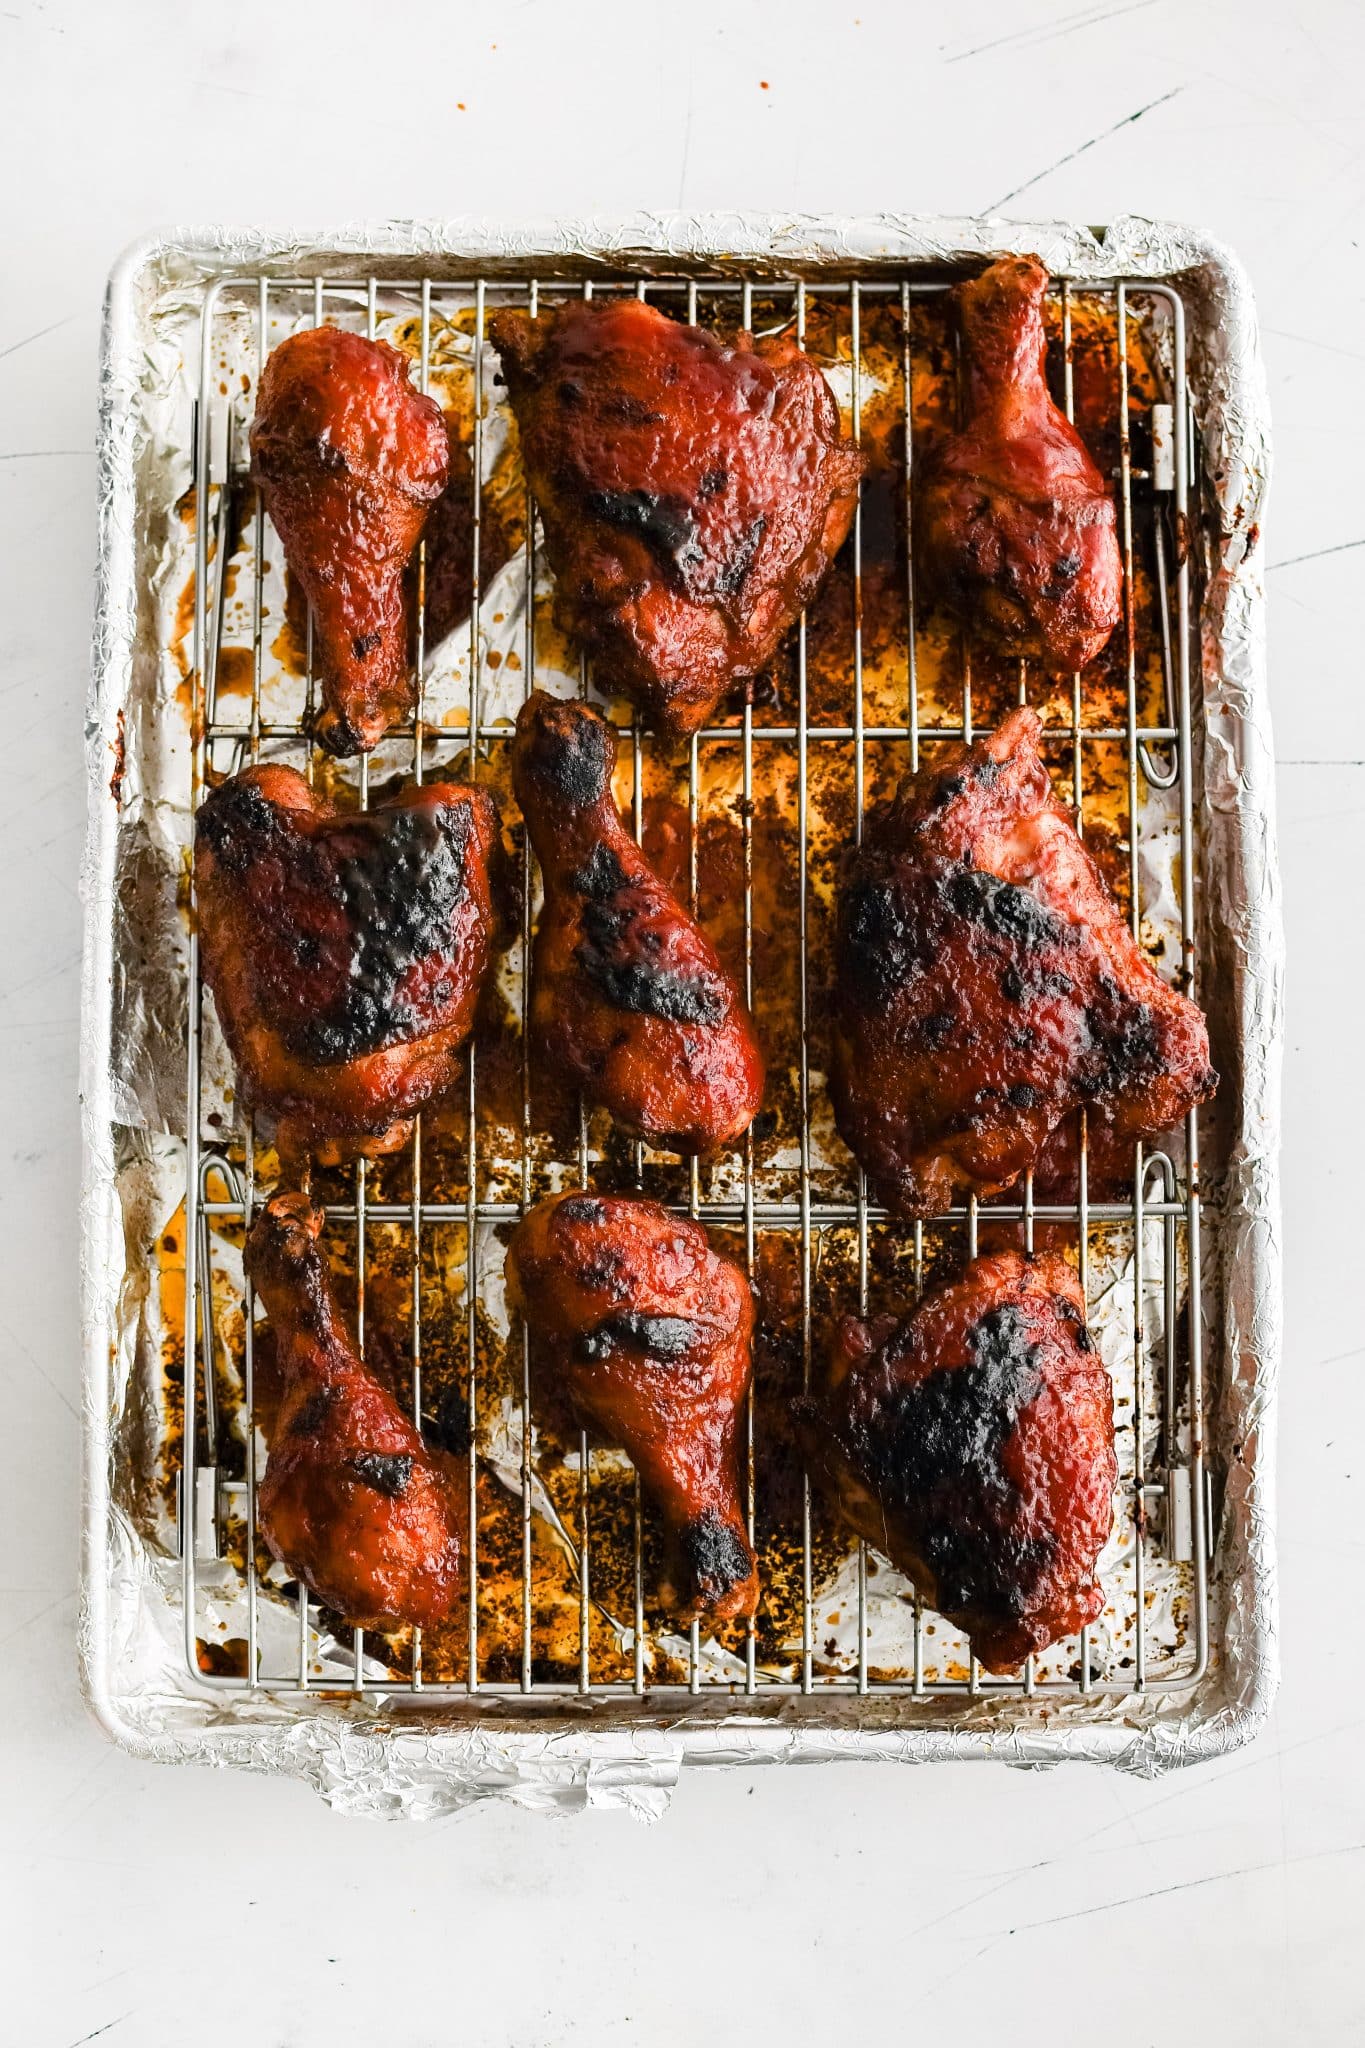 Cooling rack topped with perfectly baked bone-in skin-on BBQ chicken thighs and drumsticks coated in sticky BBQ sauce.